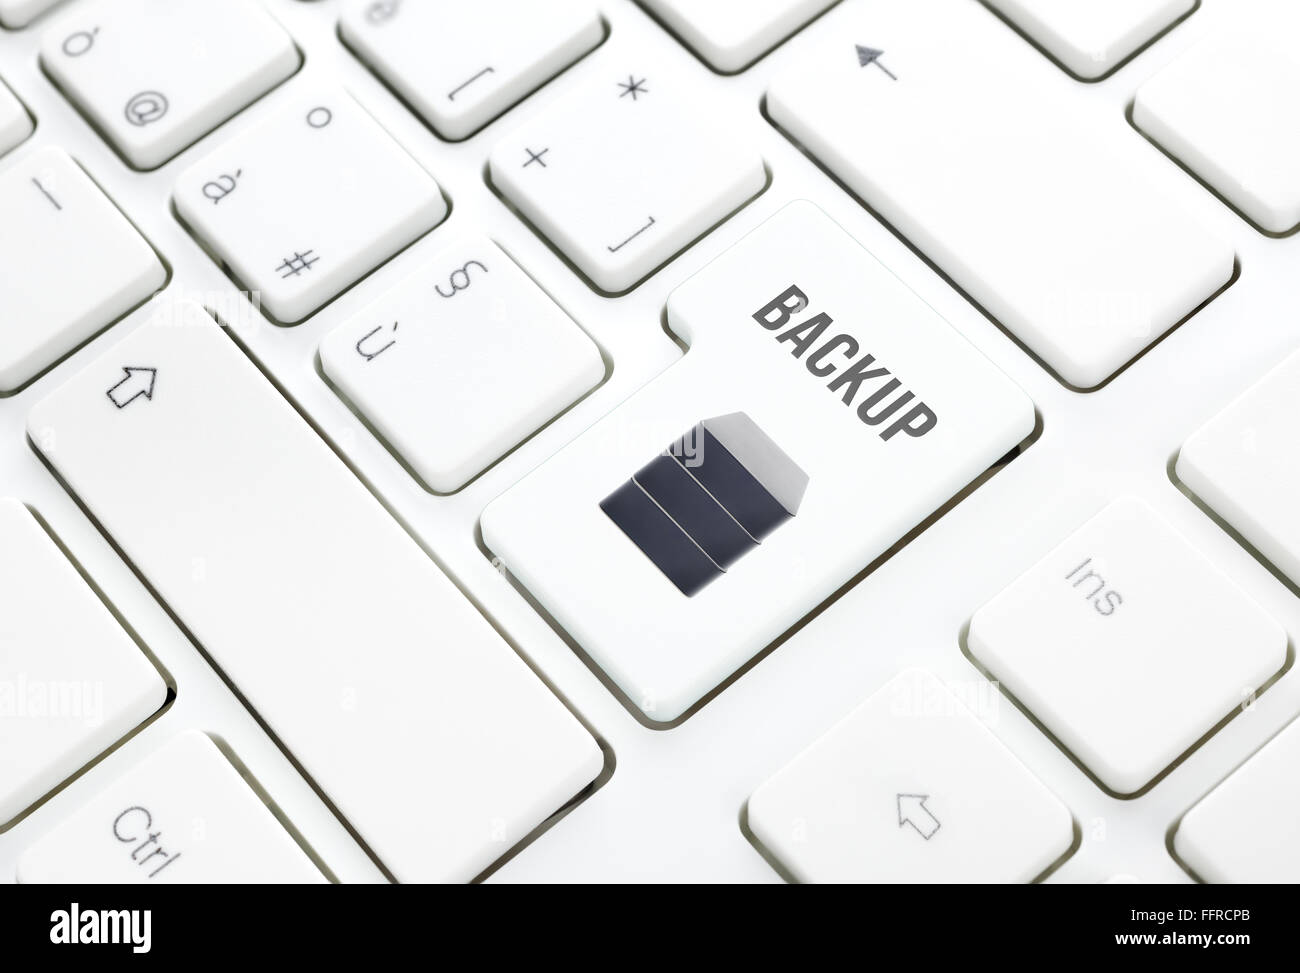 Backup safety storage technology concept. Hard disk button or key on white keyboard Stock Photo